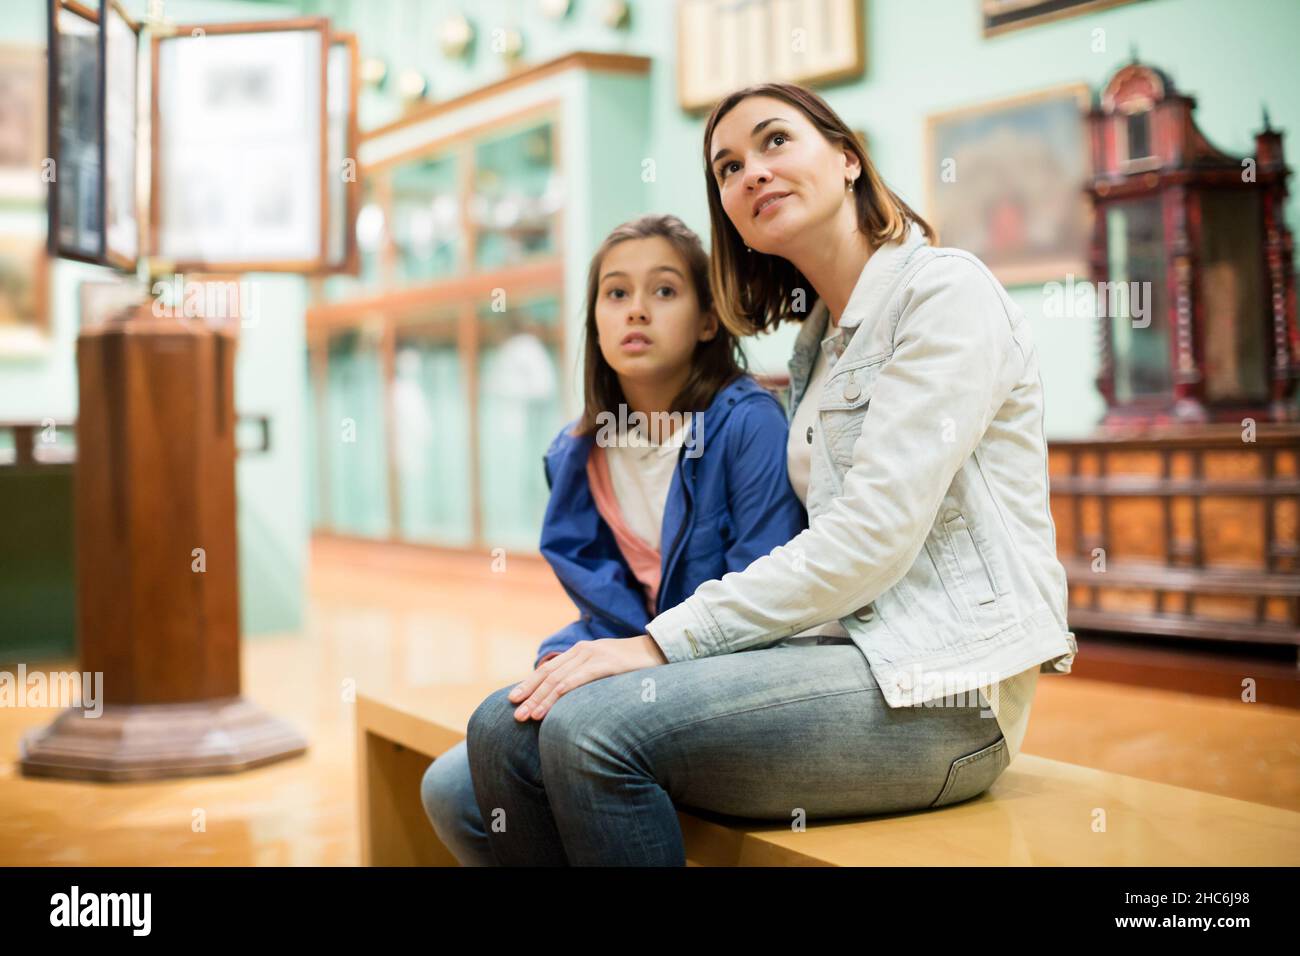 Mother and daughter exploring expositions Stock Photo